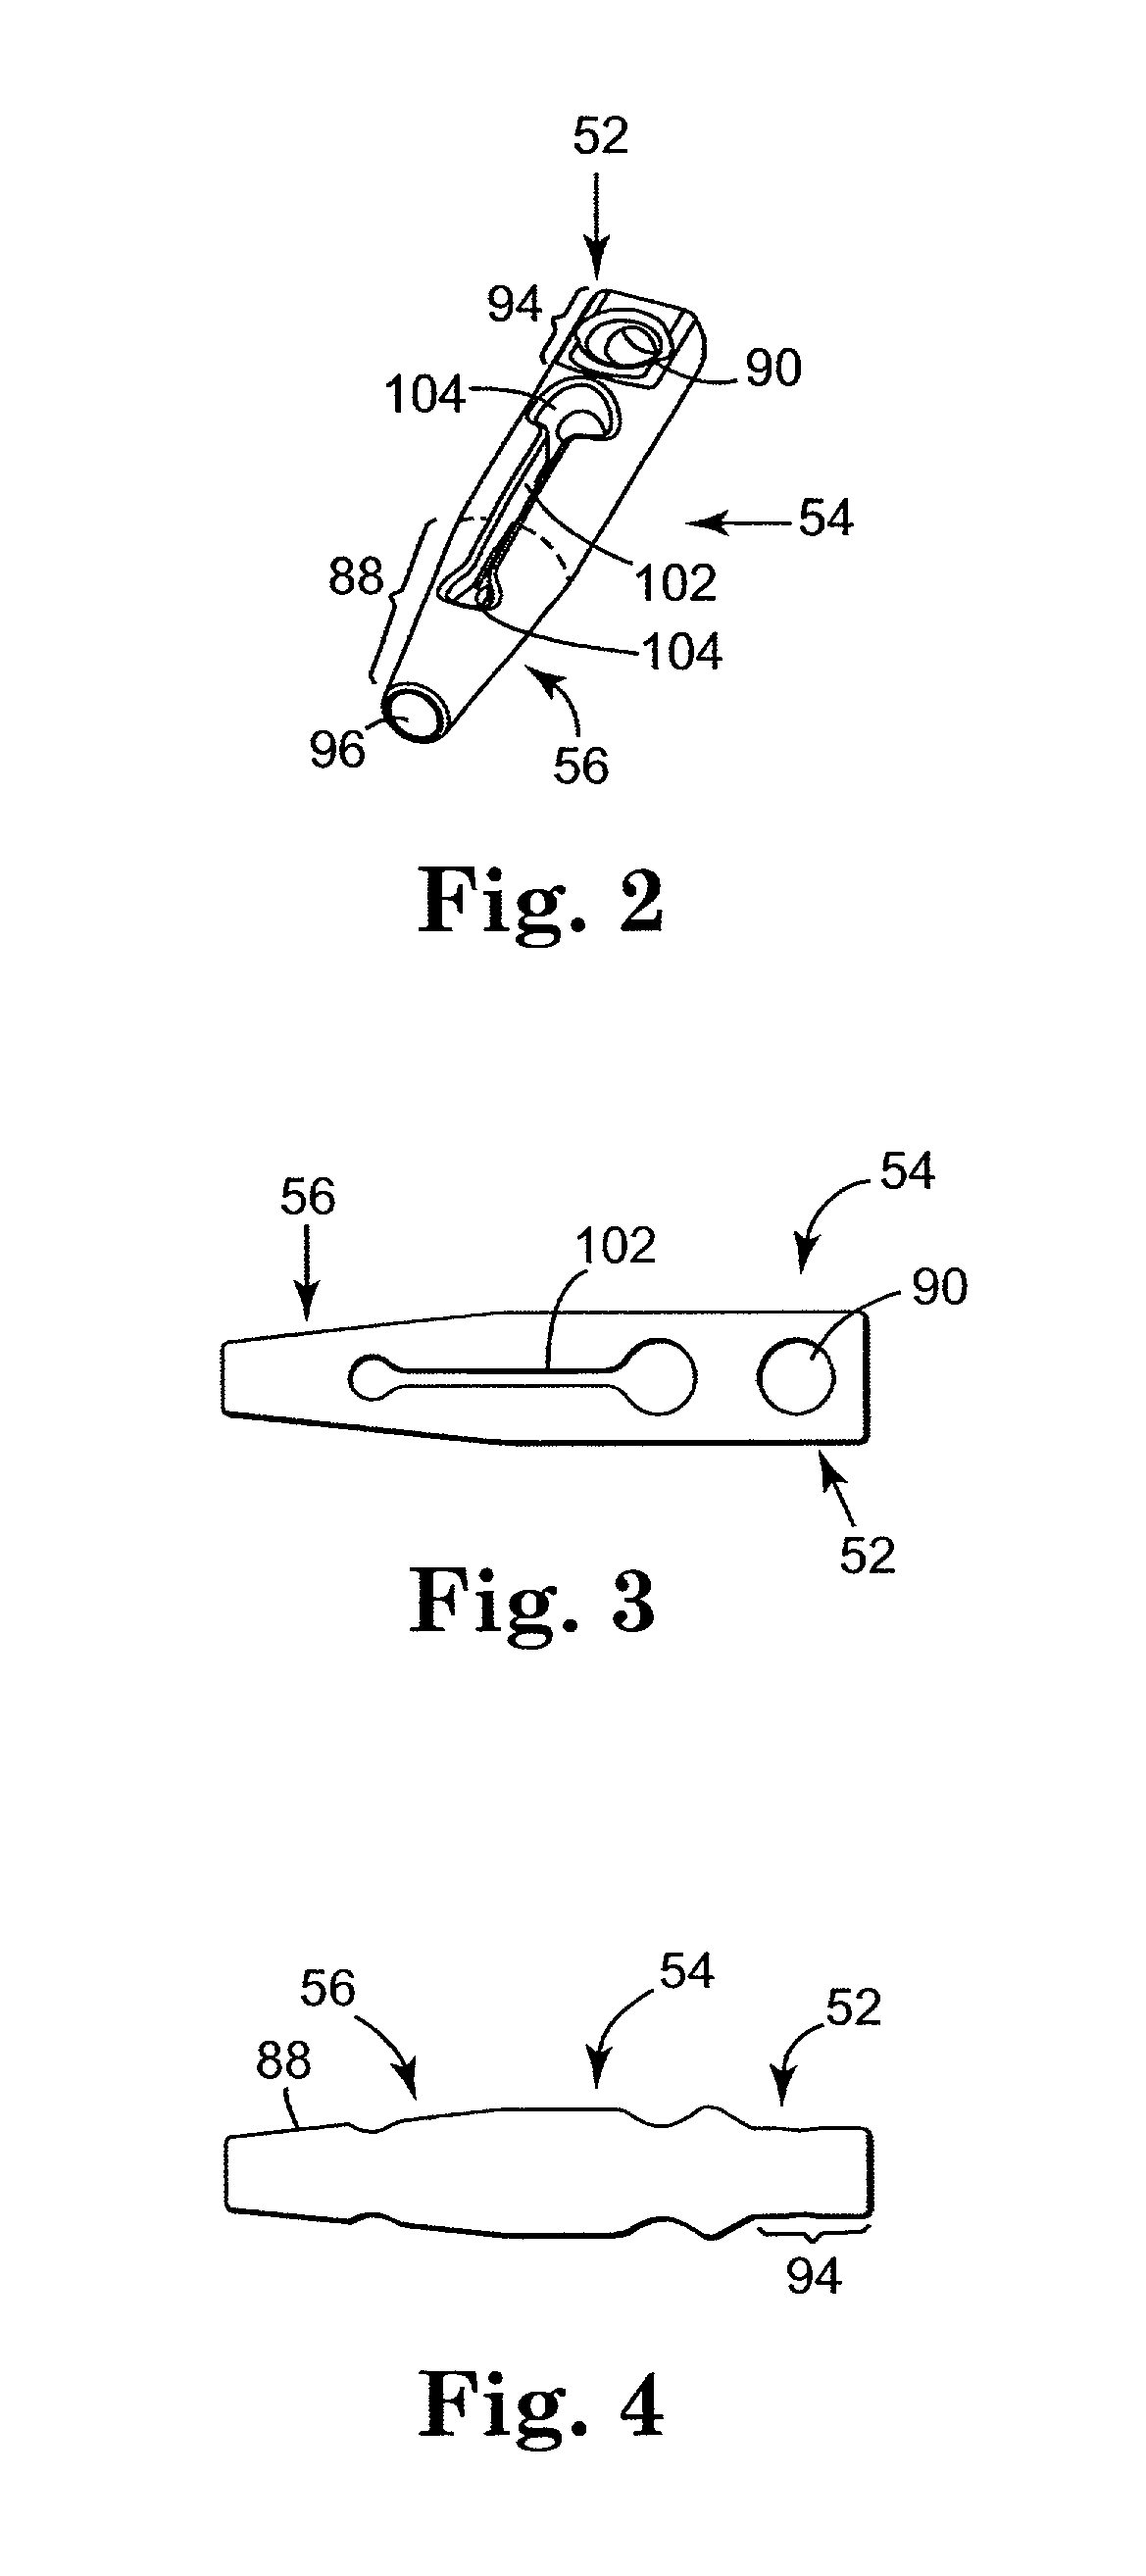 Sling assembly with secure and convenient attachment